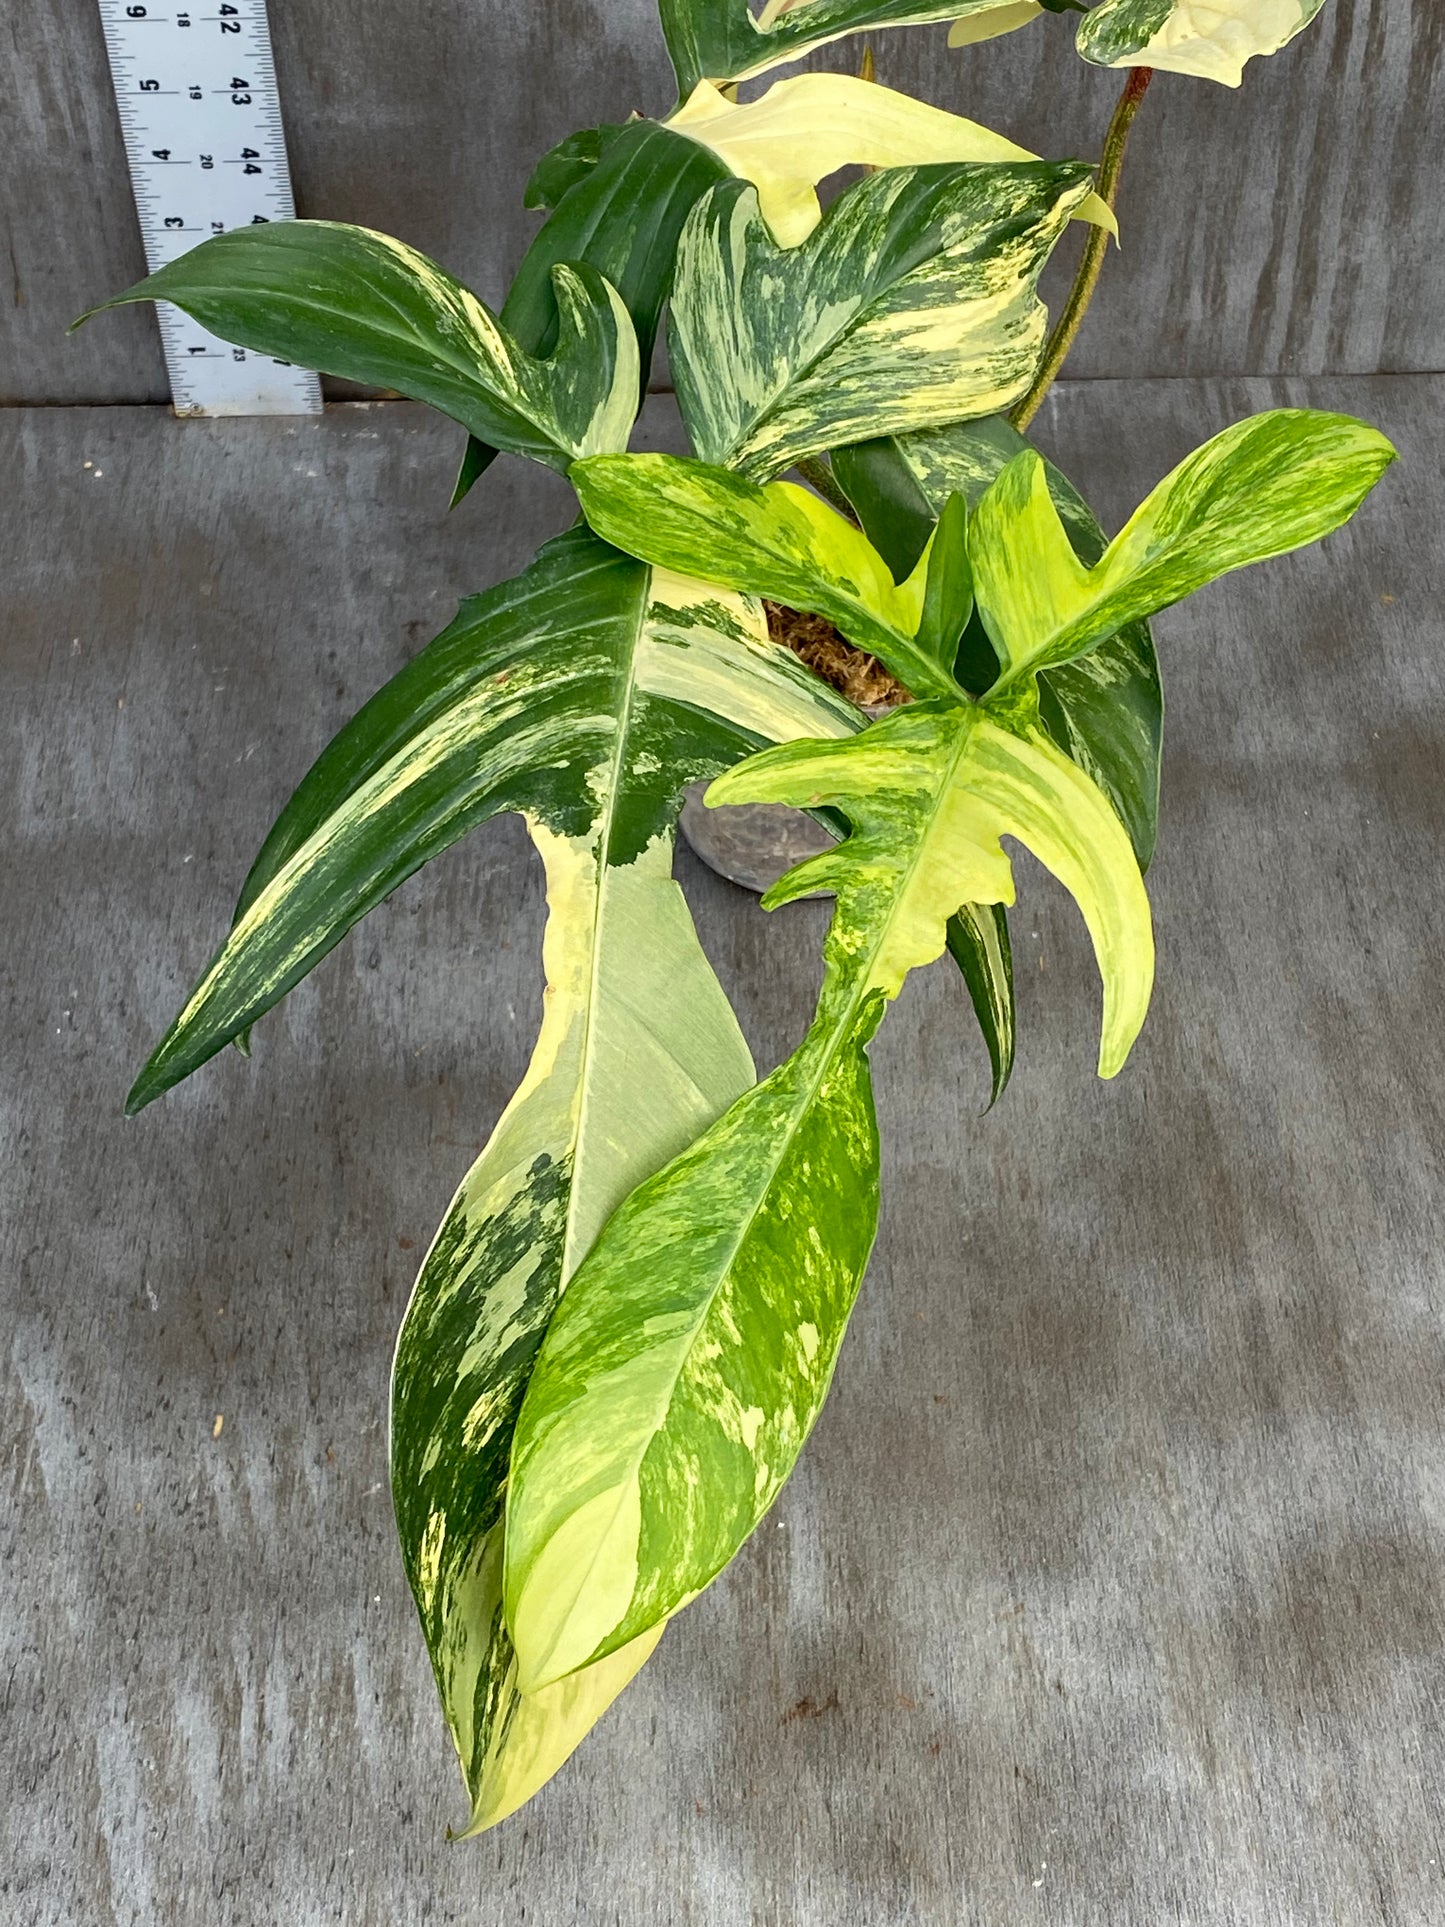 Philodendron Florida Beauty - Medium Size, High Beautiful Color!